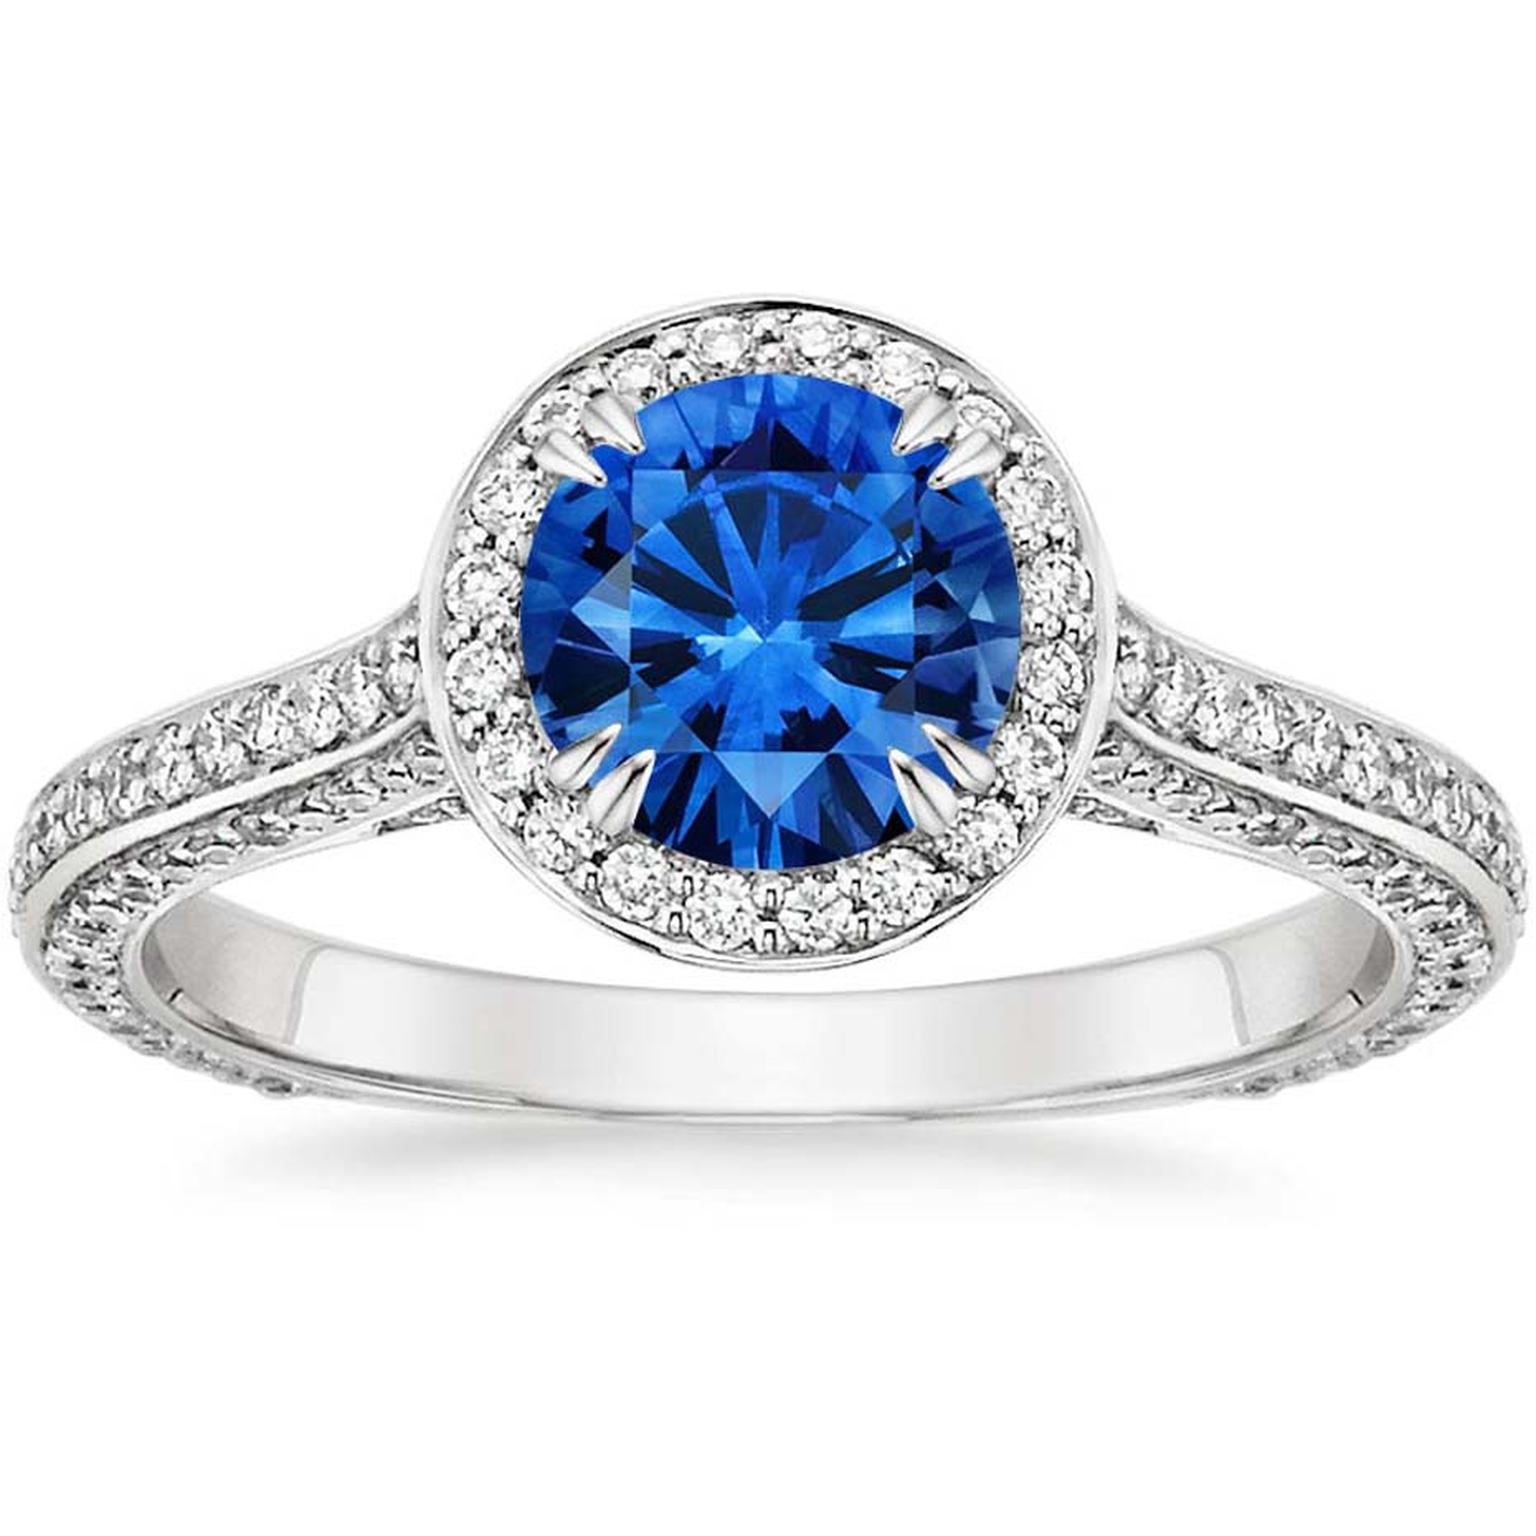 Brilliant Earth halo-style sapphire engagement ring in white gold with diamonds (£2,800).